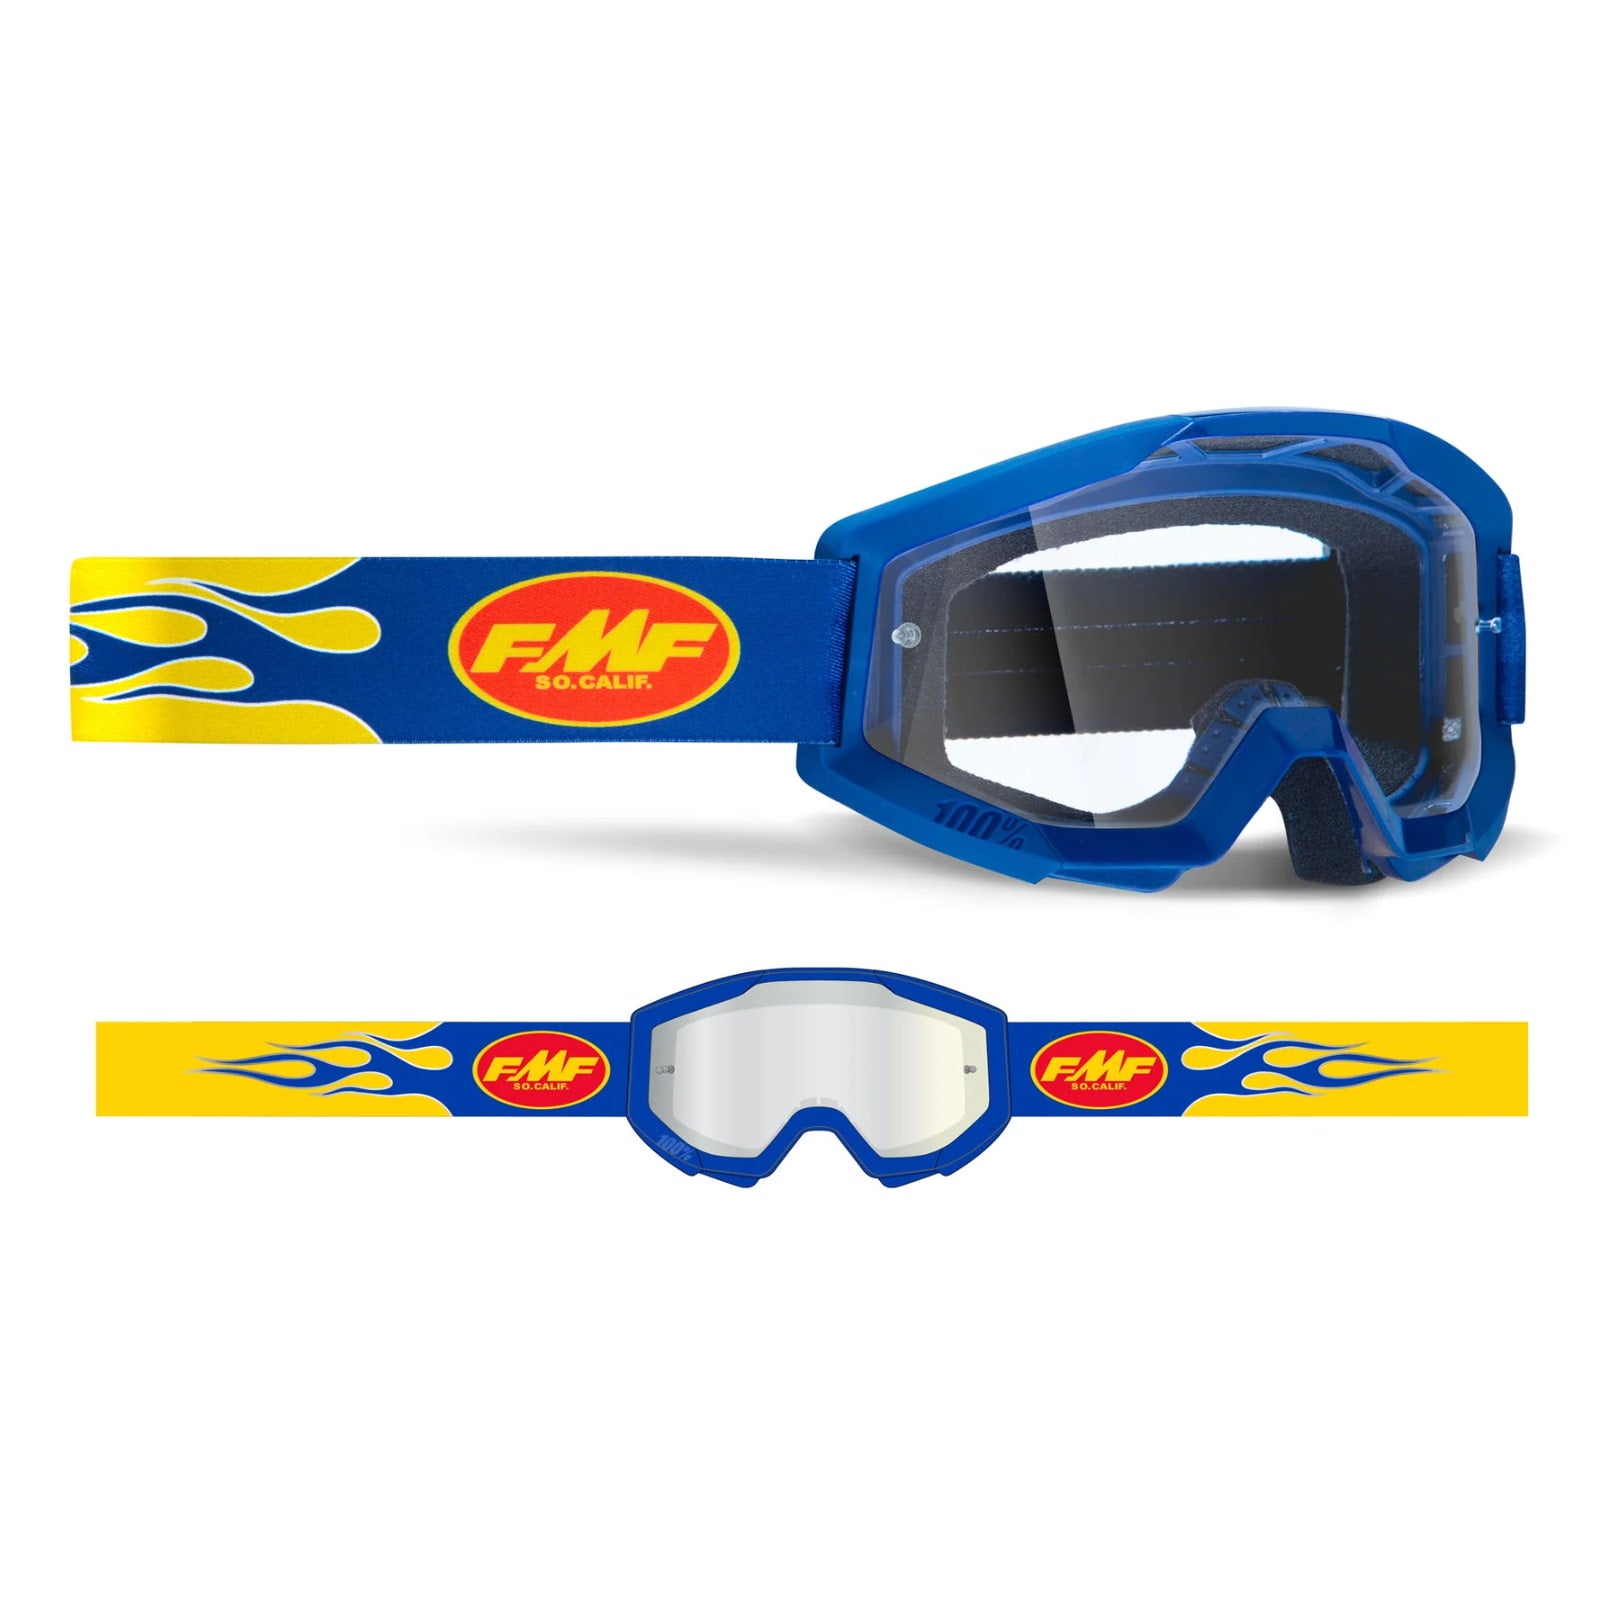 FMF PowerCore Clear Lens Goggles（エフエムエフ パワーコア クリア